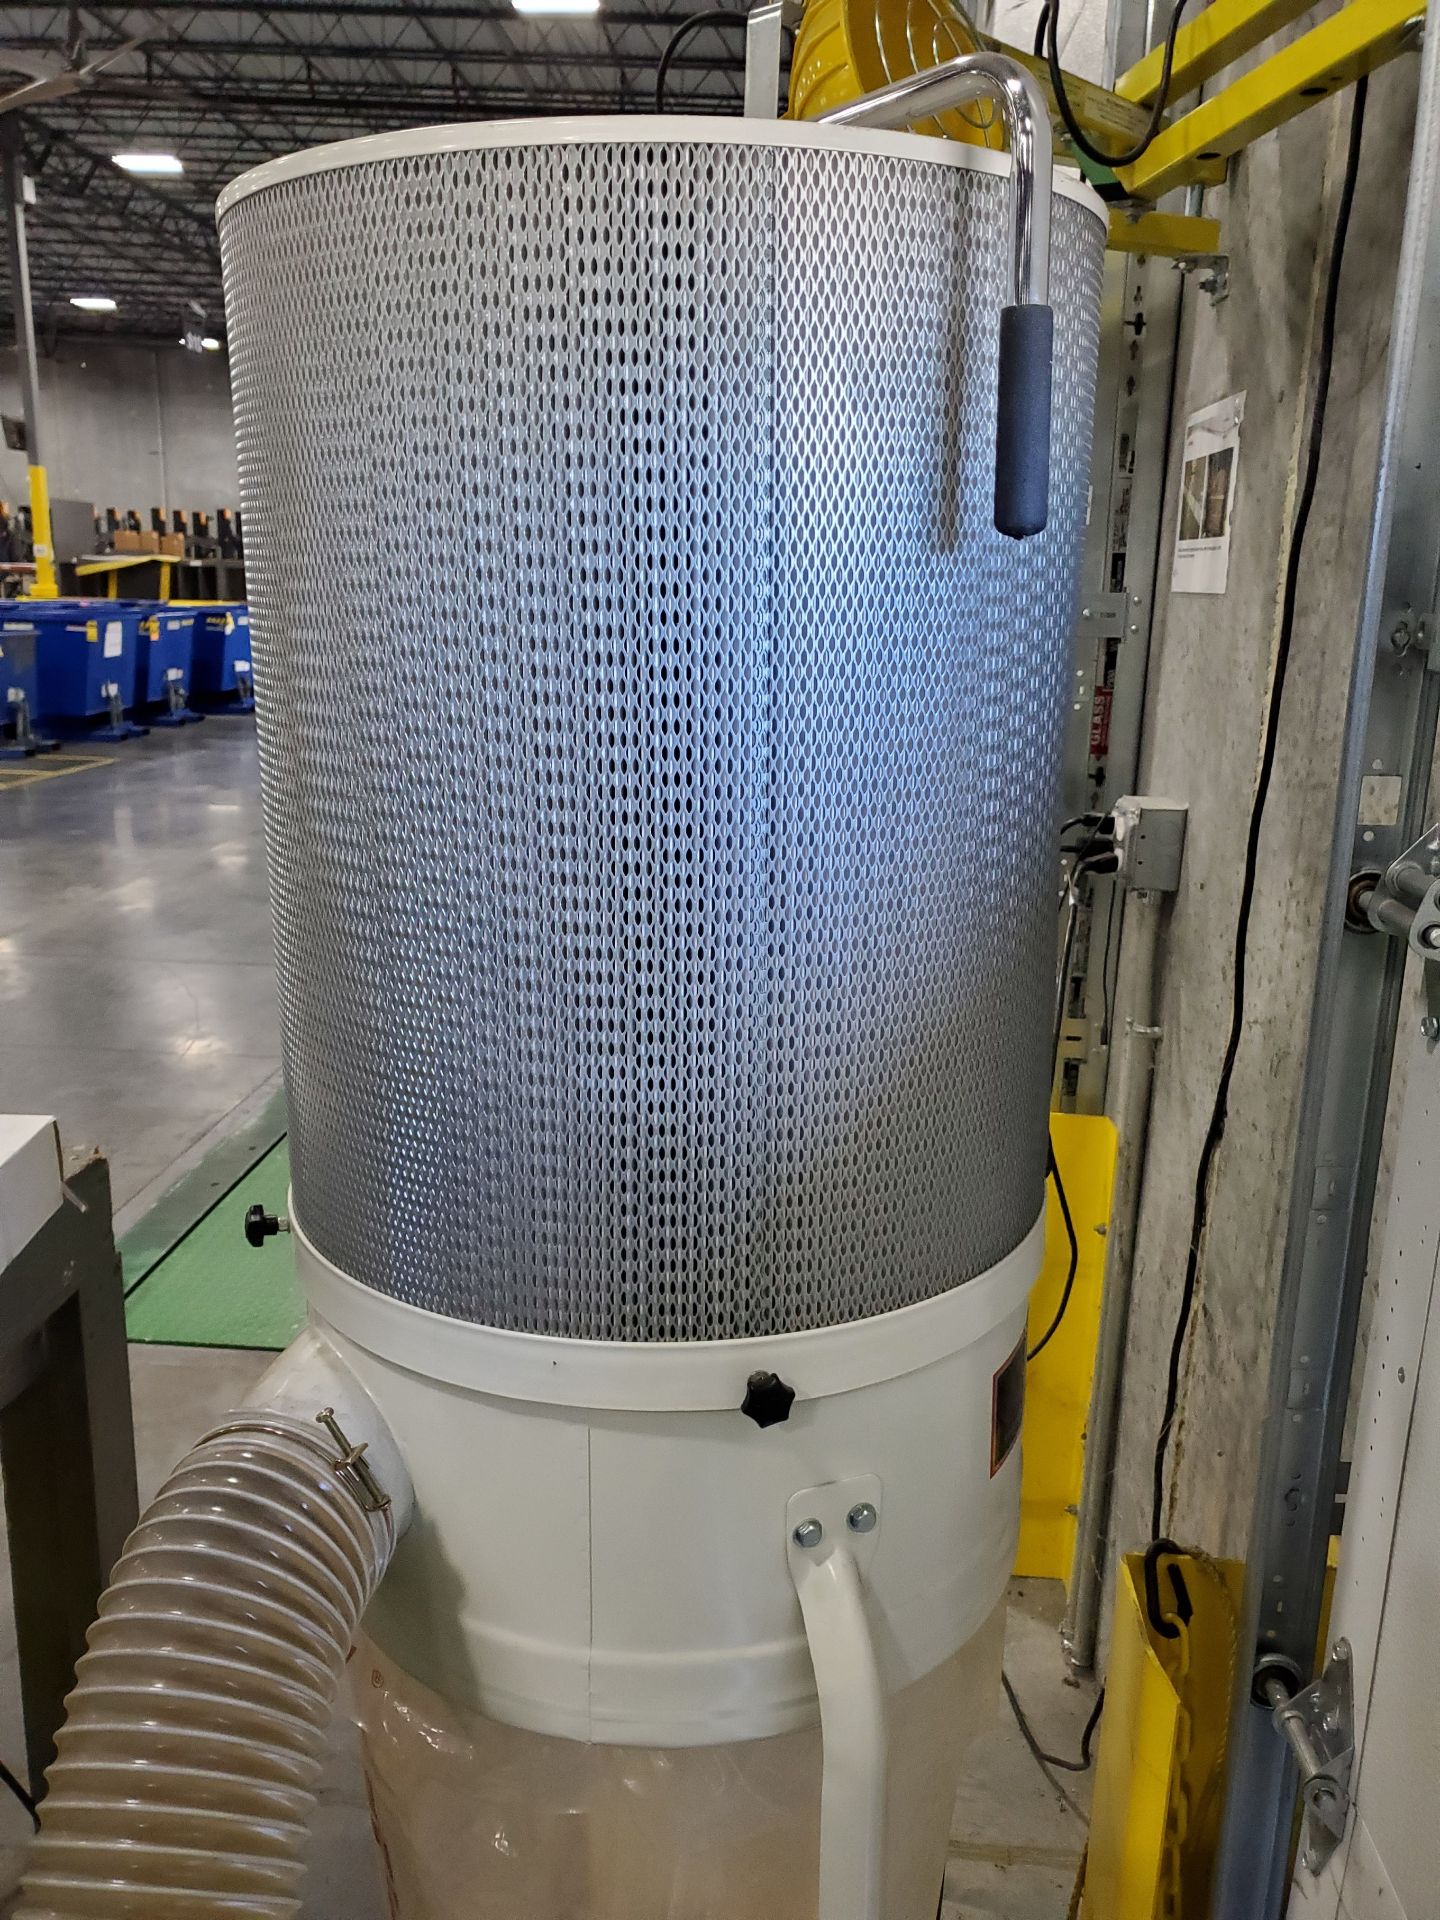 JET VORTEX CONE PORTABLE DUST COLLECTOR, MODEL DC-1100VX, 1.5 HP, 115/230V, S/N 19041342, BOTTOM - Image 9 of 9